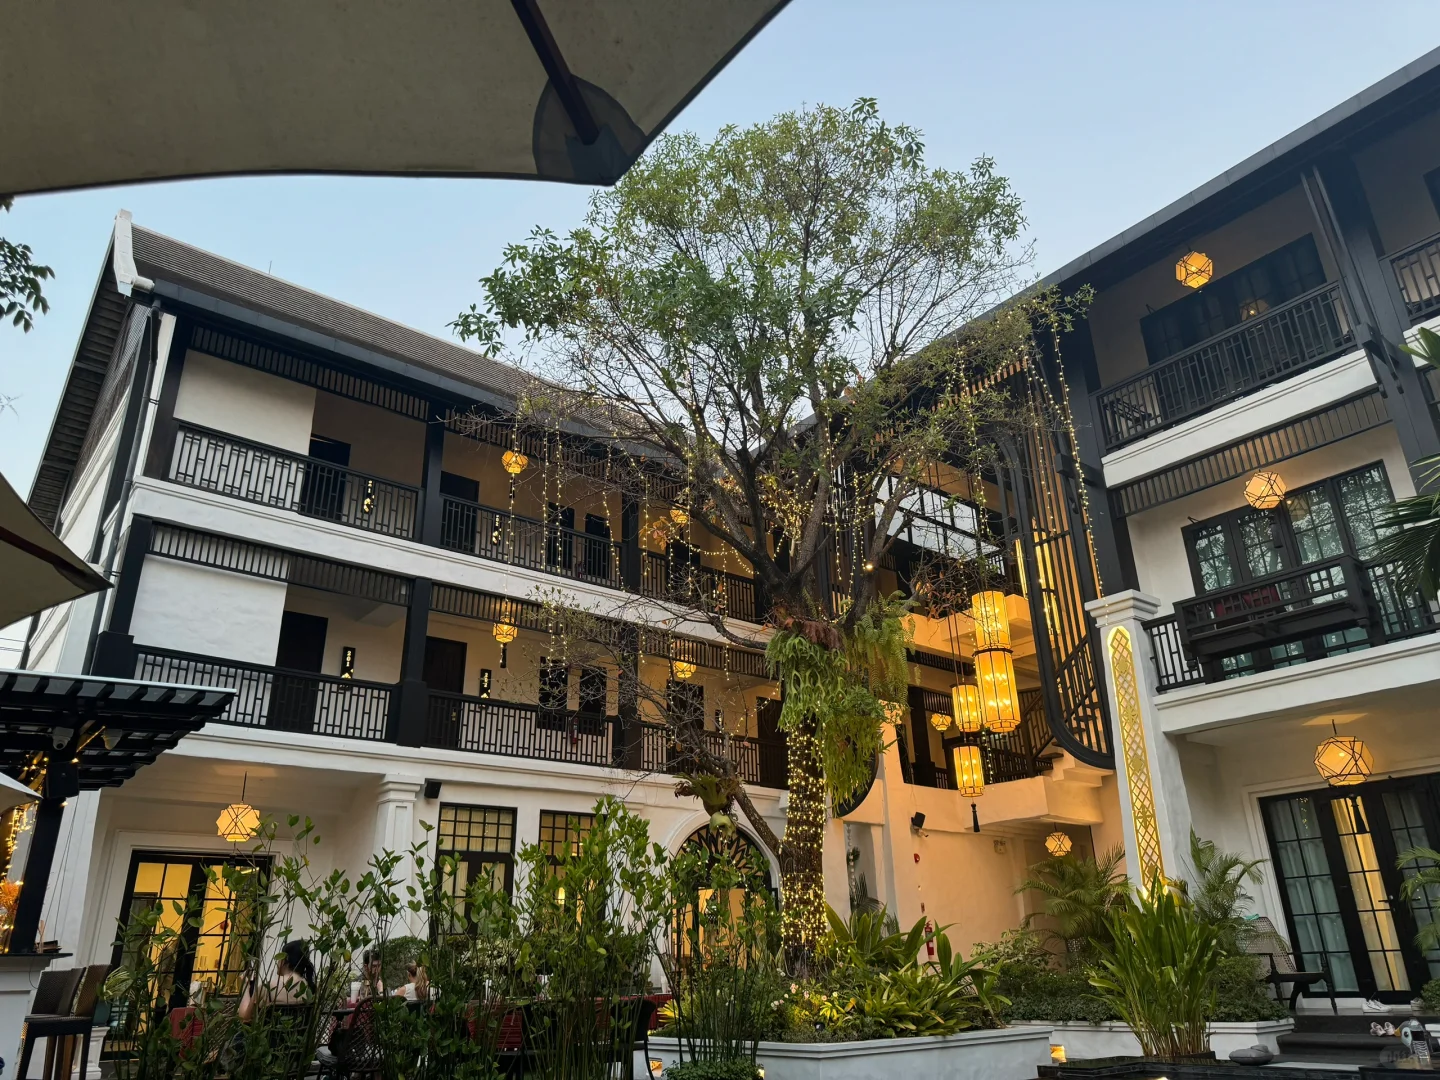 ChiangMai-Comparison of stay experience between Aksara Heritage hotel and The earth hotel